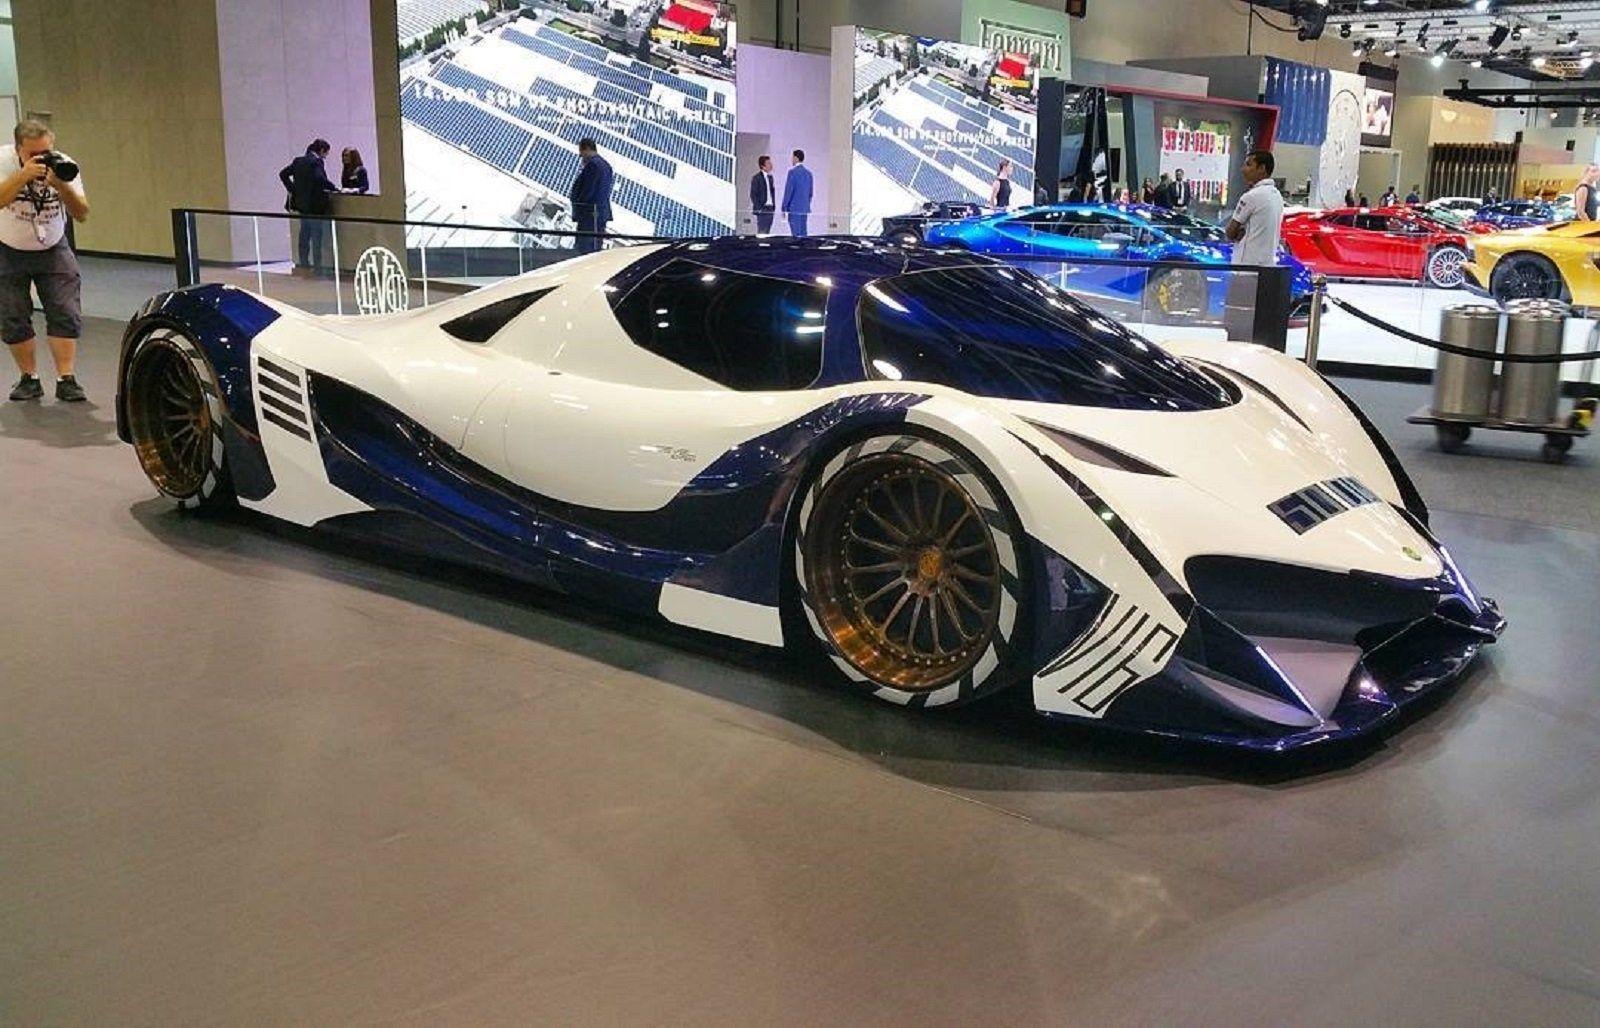 Devel Claims It Has 12.3 Liter V16 Producing 000 Hp And A Top